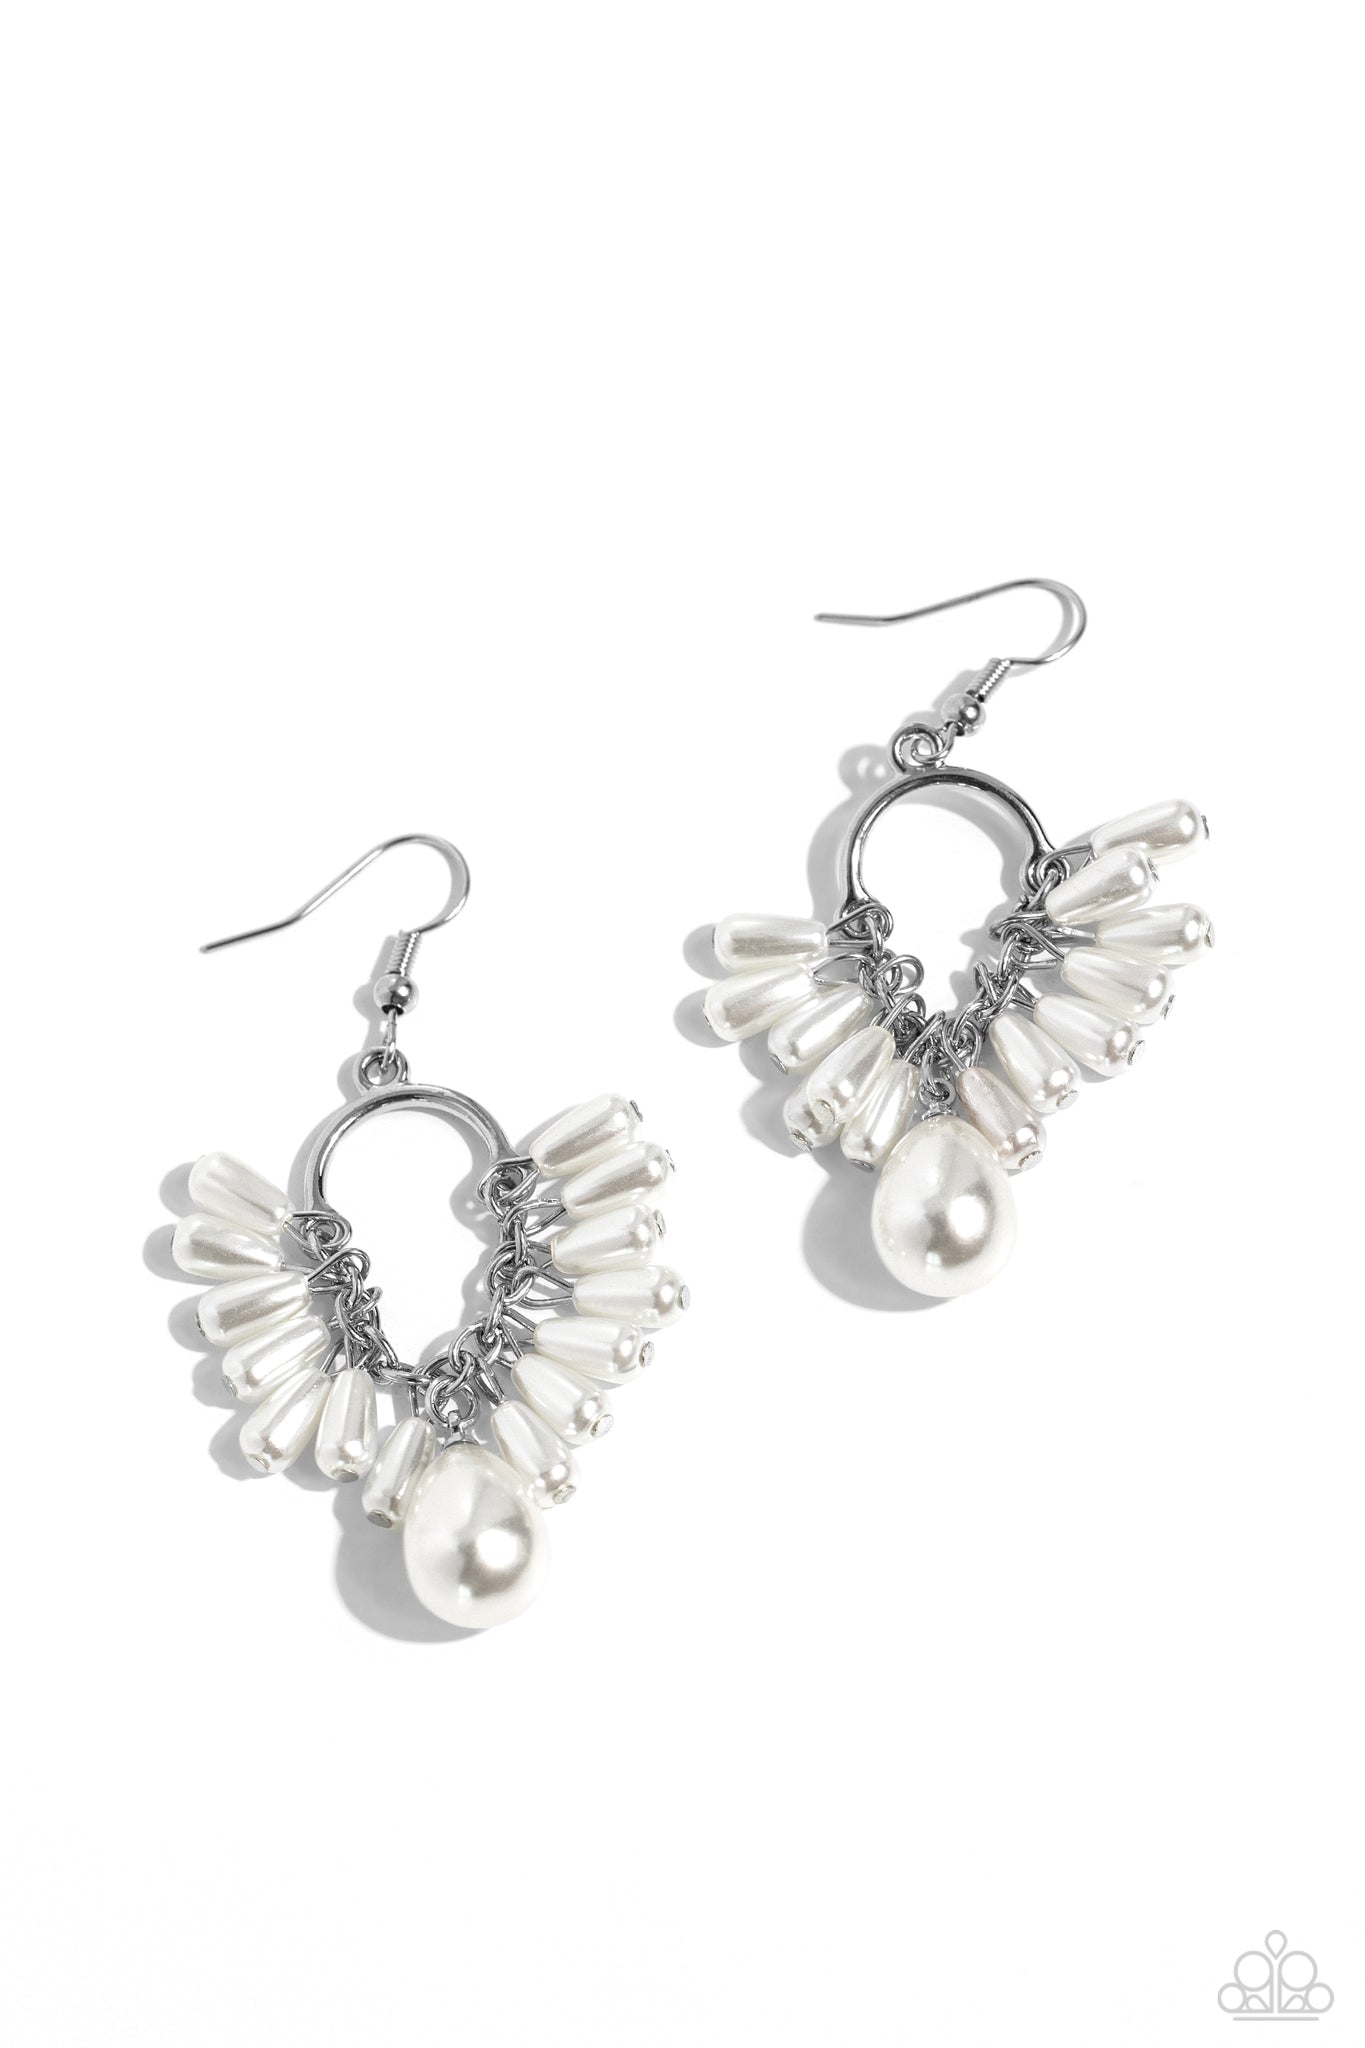 Paparazzi - Ahoy There! - White Earrings